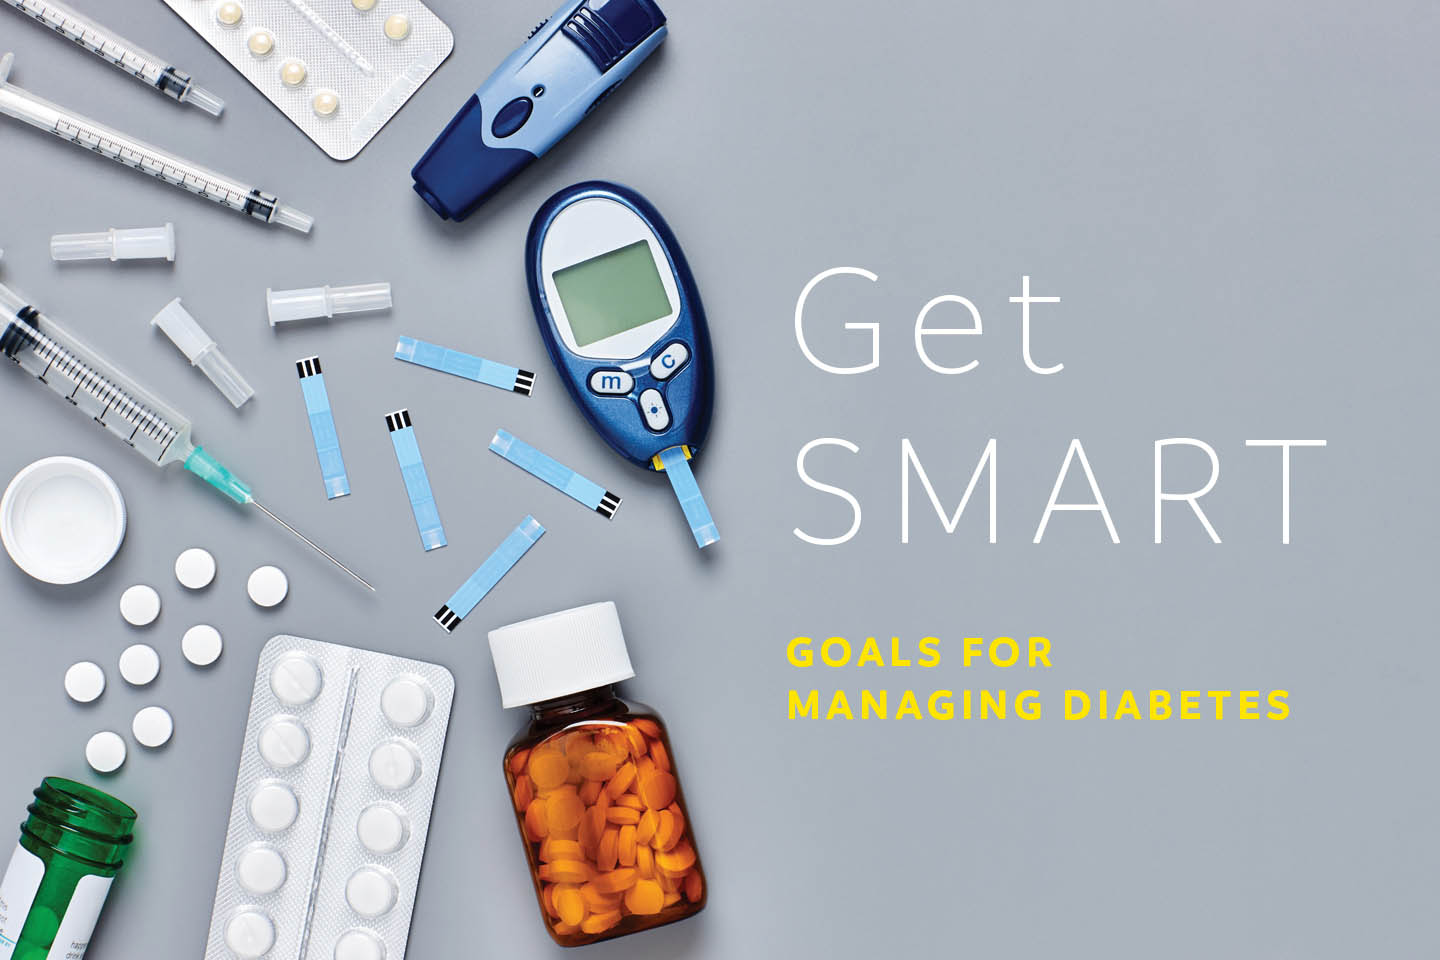 get smart medicine and tesing for diabetes chattanooga